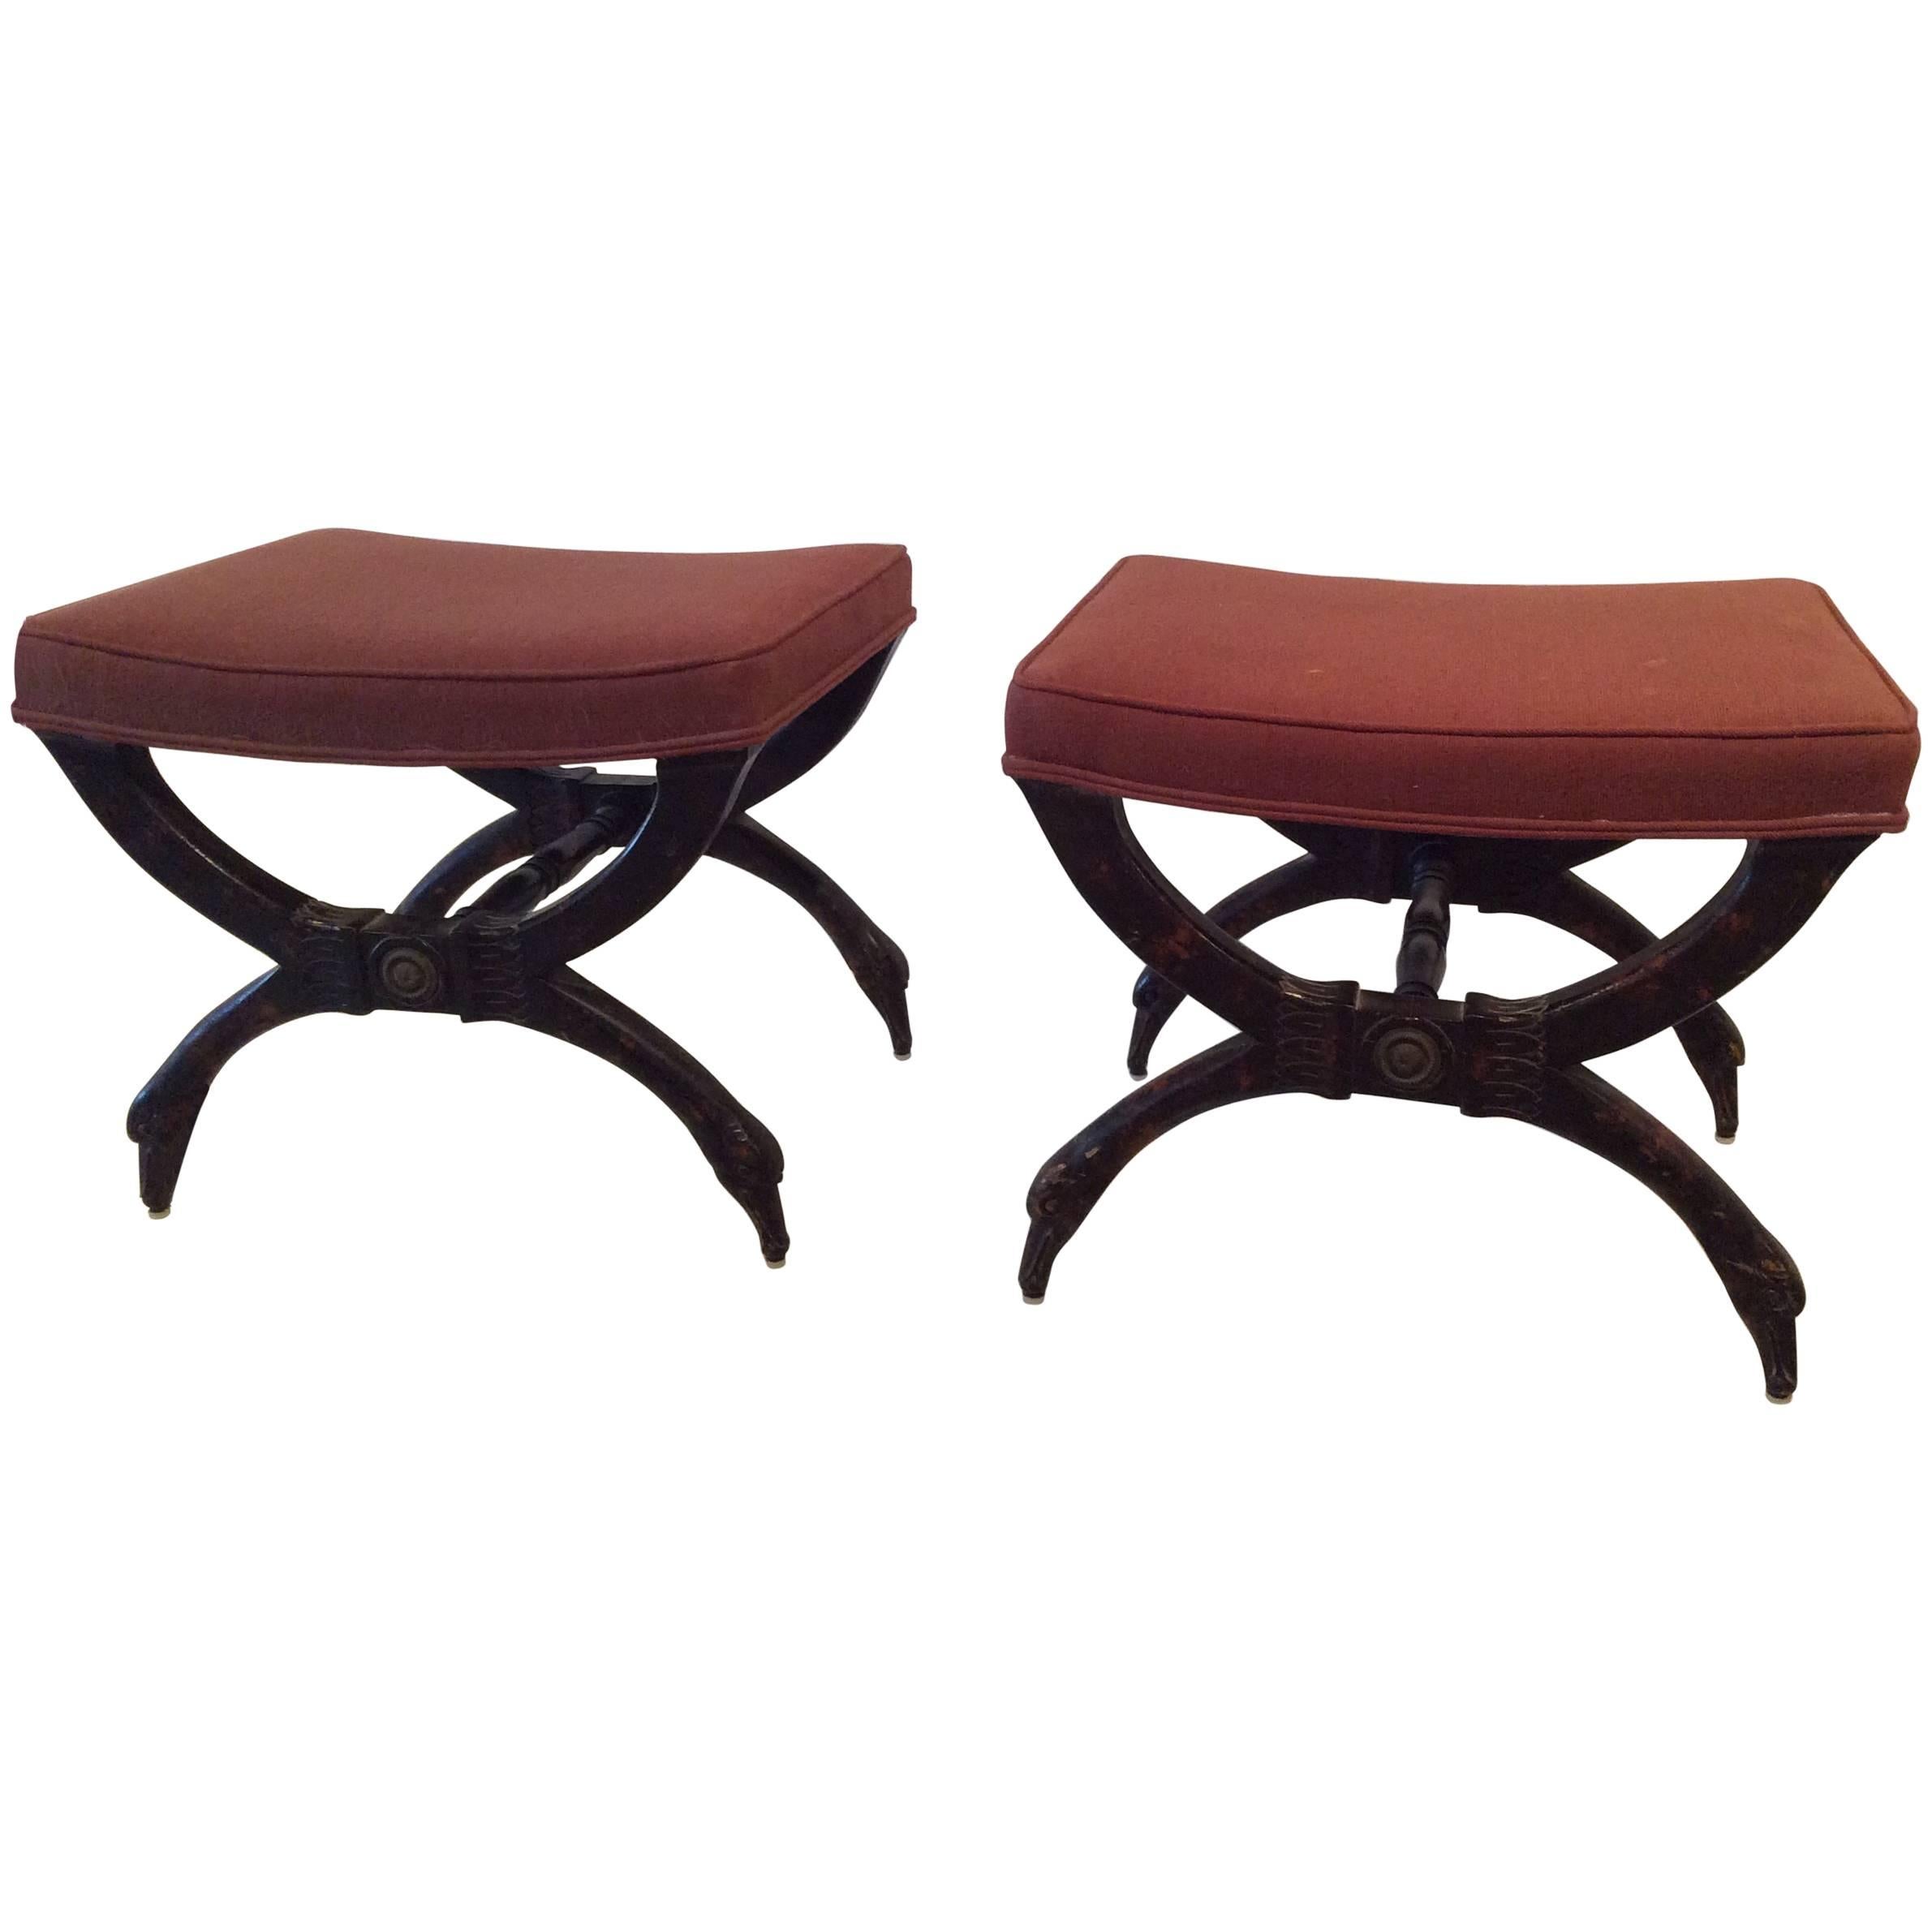 Wood Swan Pair of x Benches Stools Vintage Hollywood Regency Palm Beach